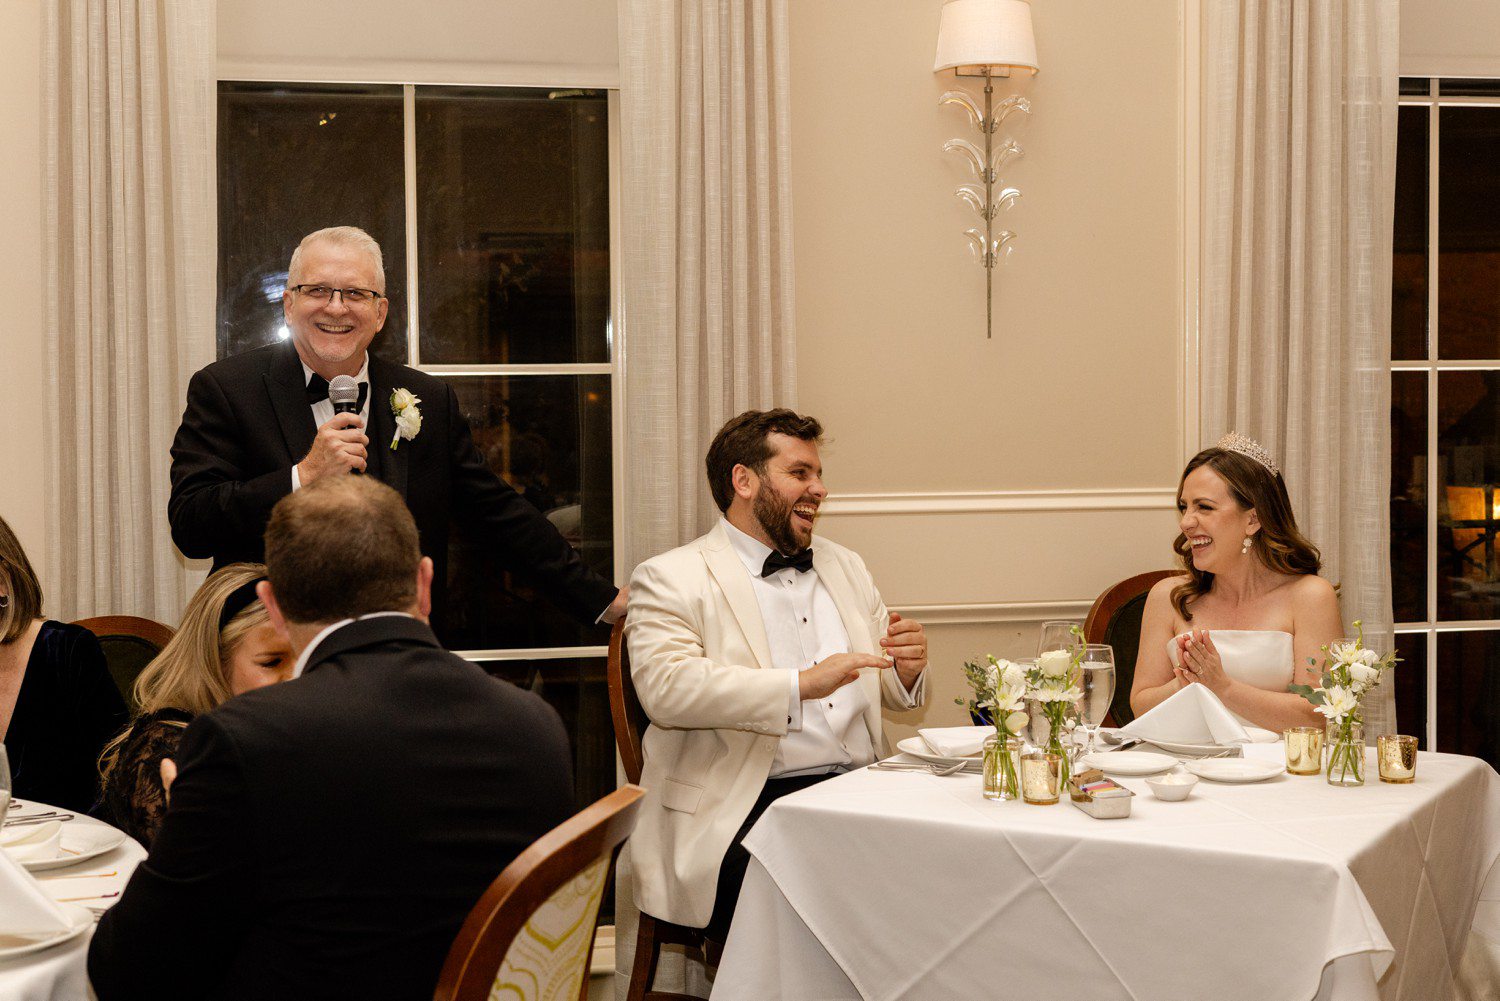 Bride and groom laughing during toast at wedding.